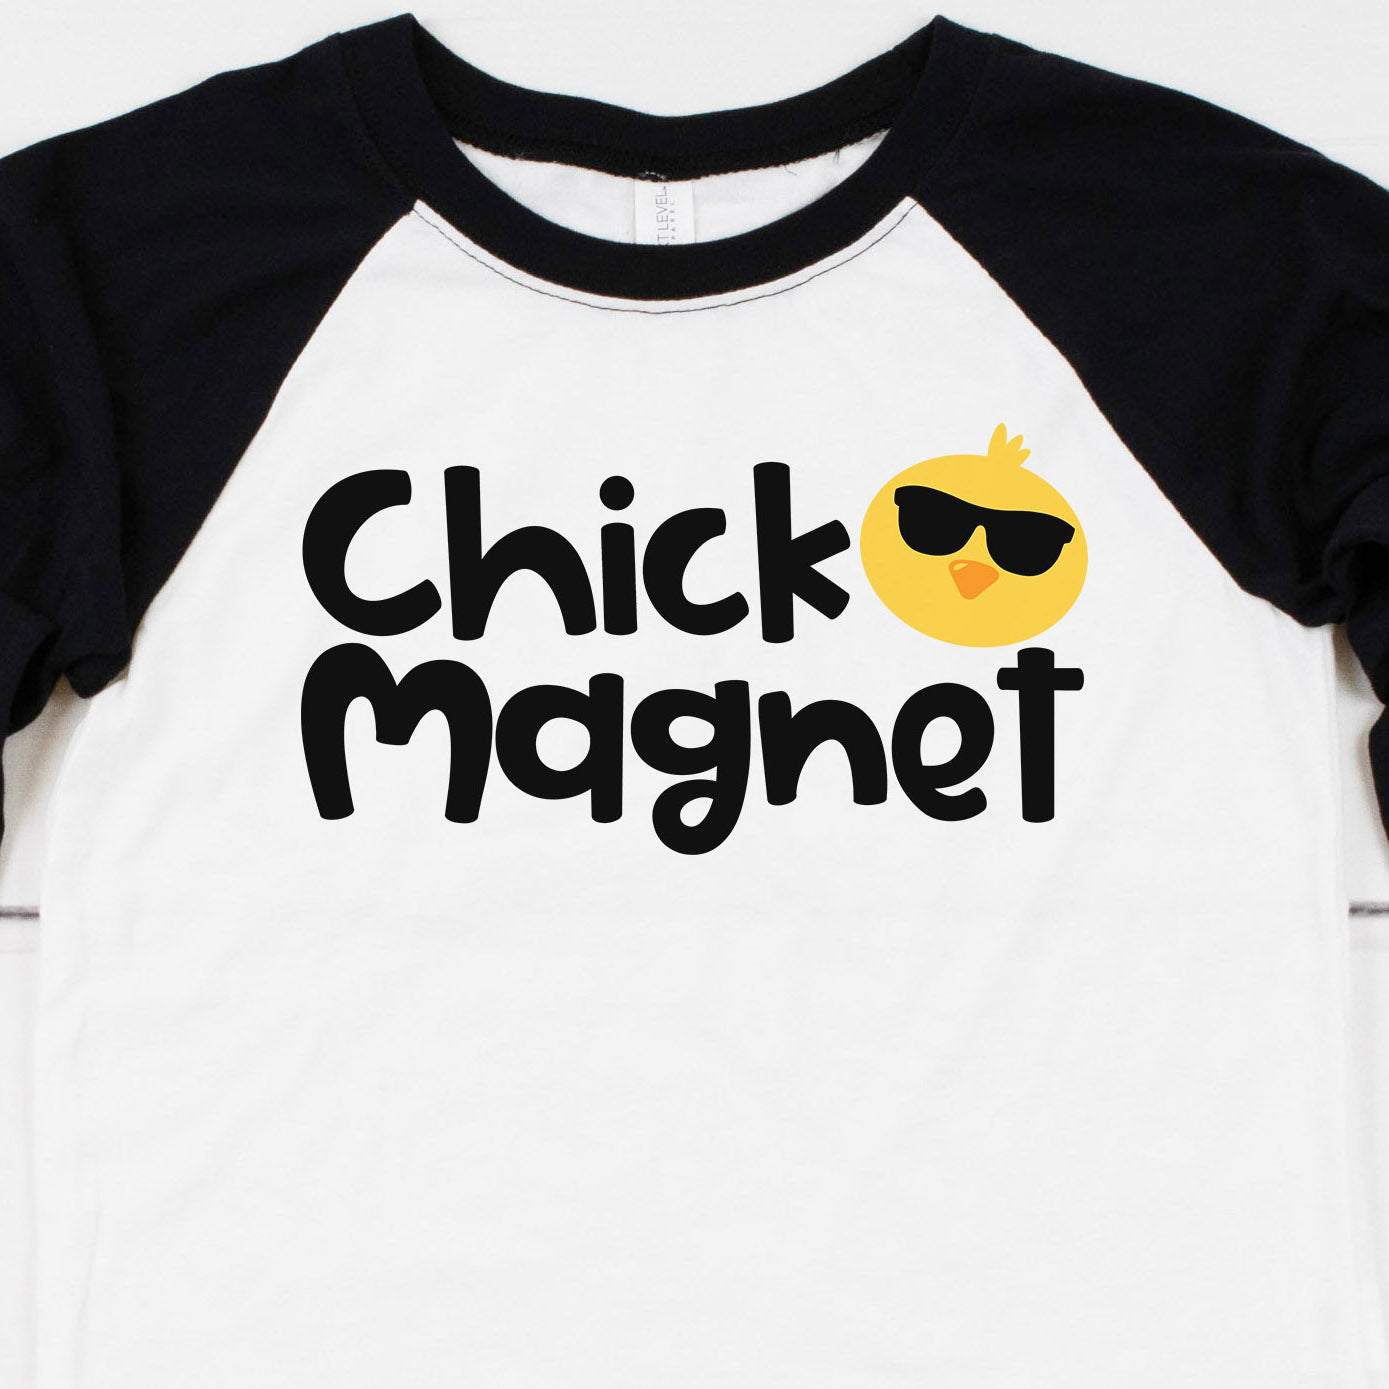 Chick Magnet